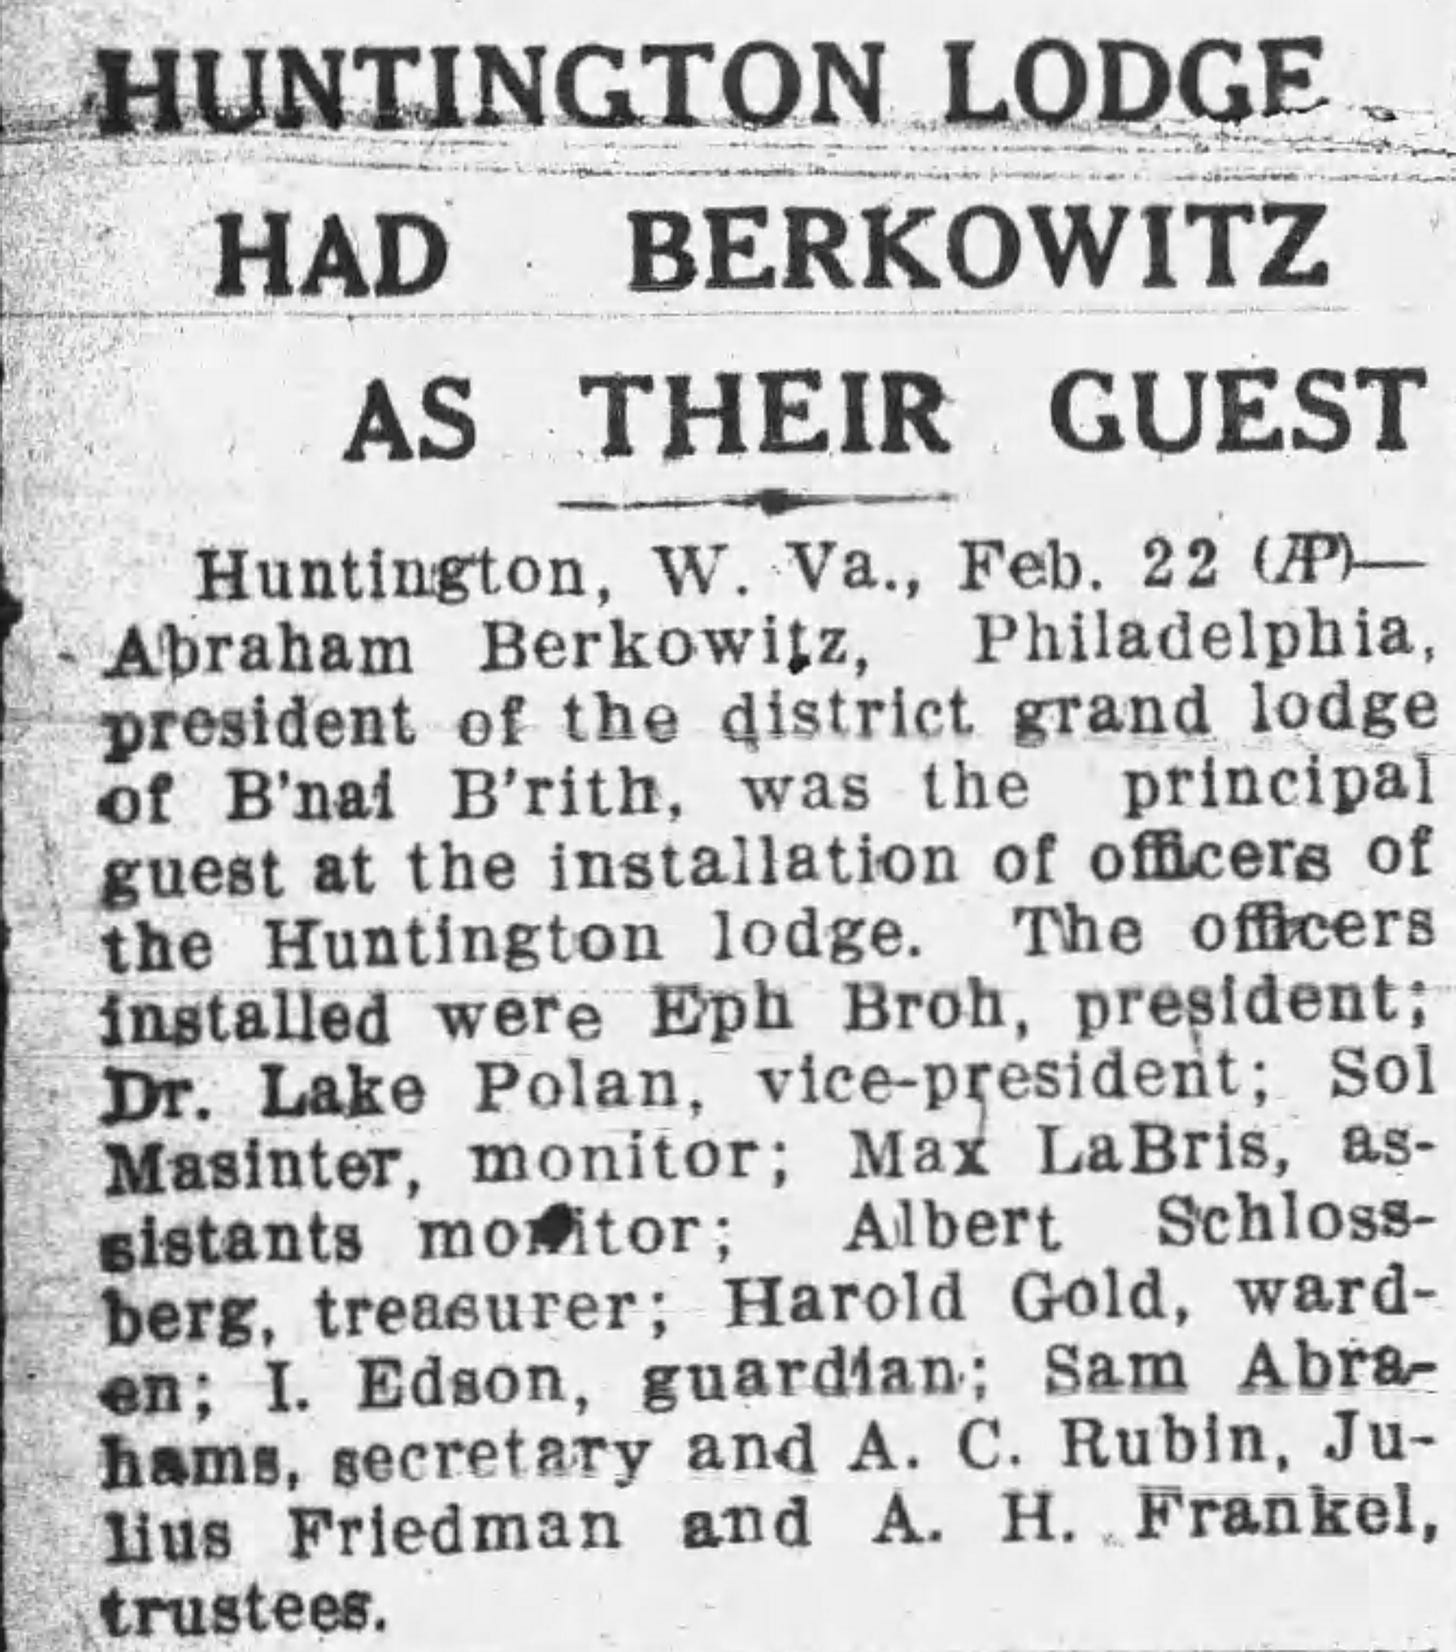 Newspaper article detailing the events of a meeting of the local B'nai B'rith. 